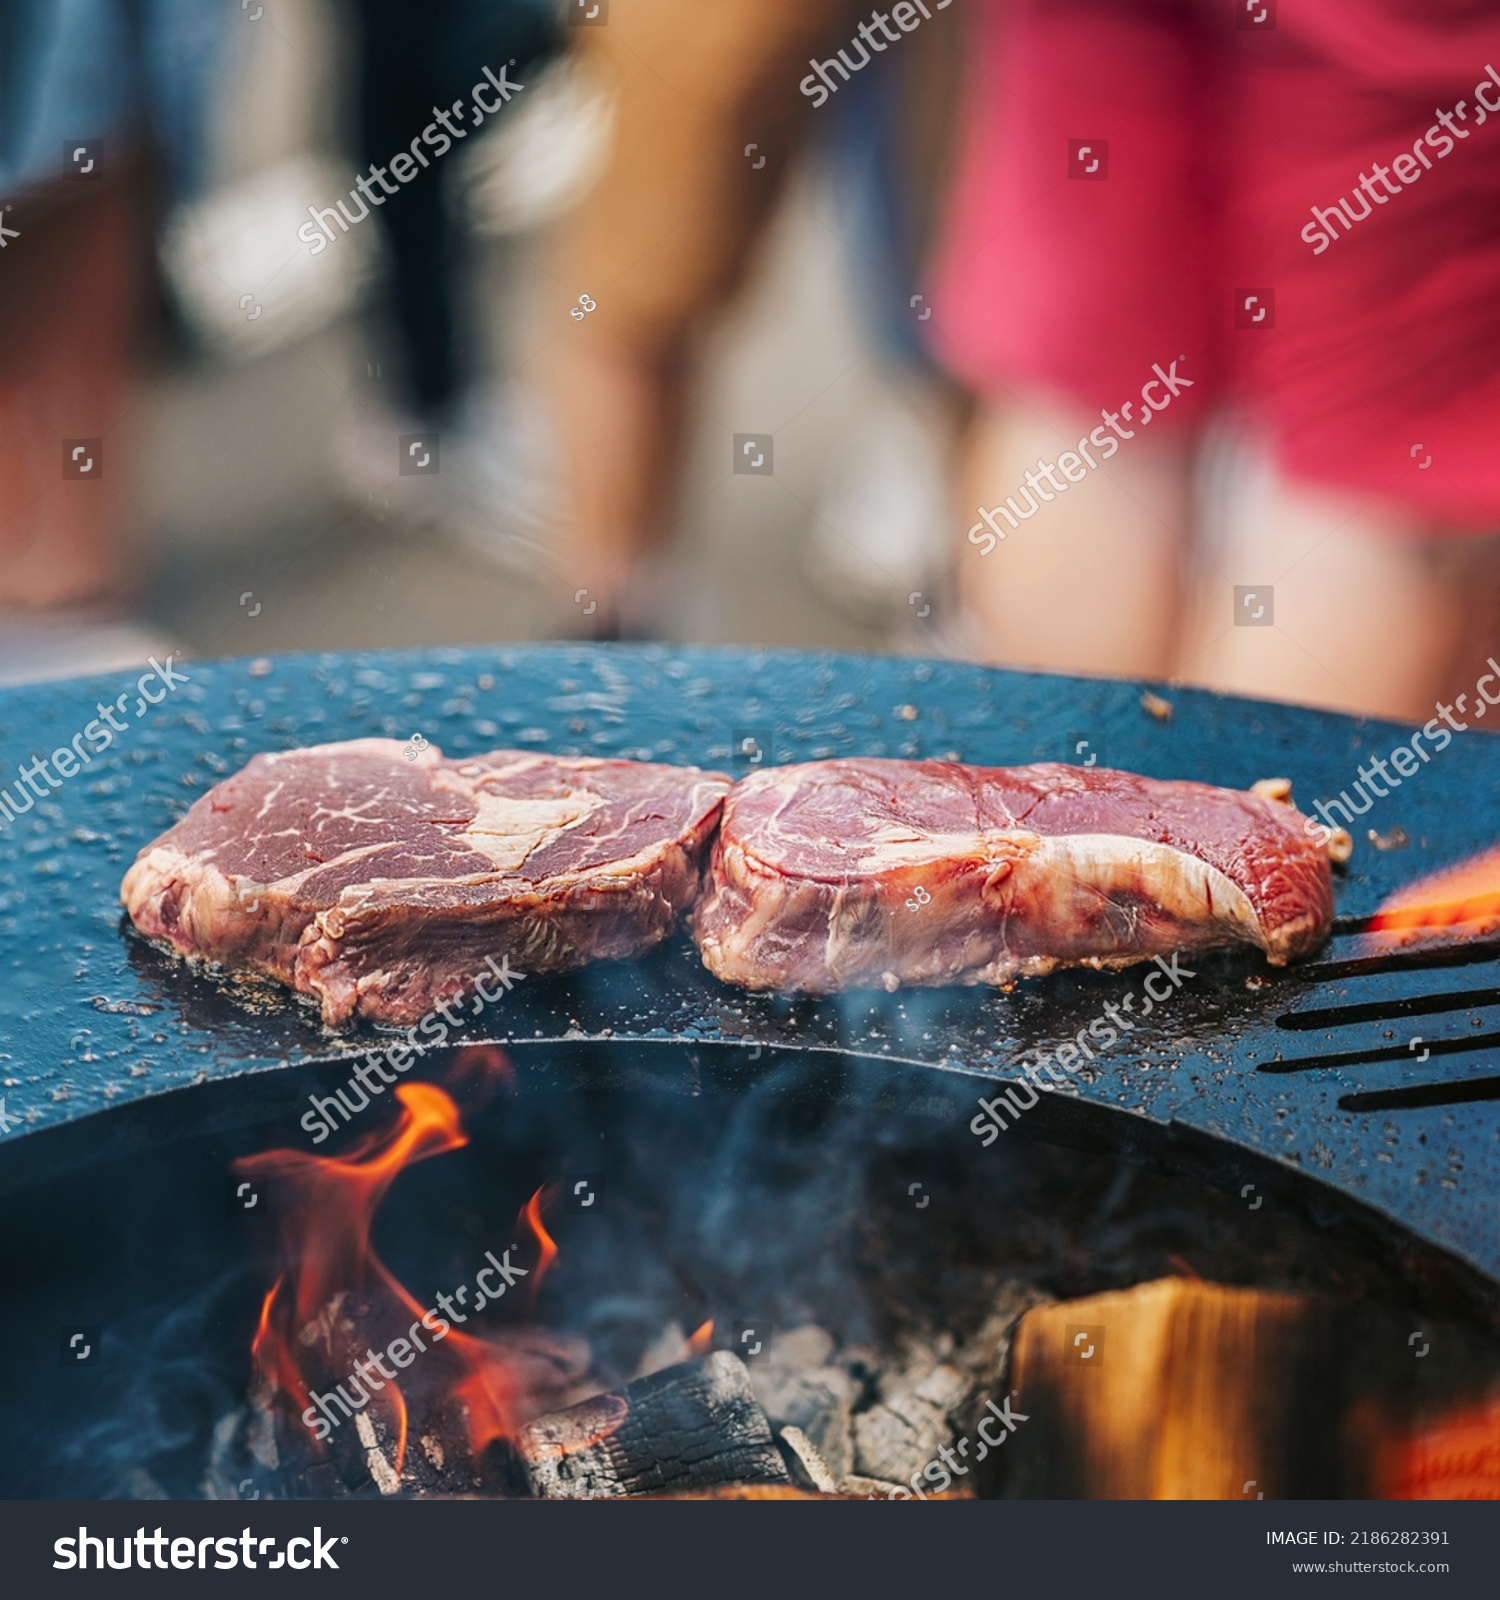 Steaks prepared on bbq grill Close-up, barbecue outdoors with fire flame. Summer picnic concept. Selective focus #2186282391